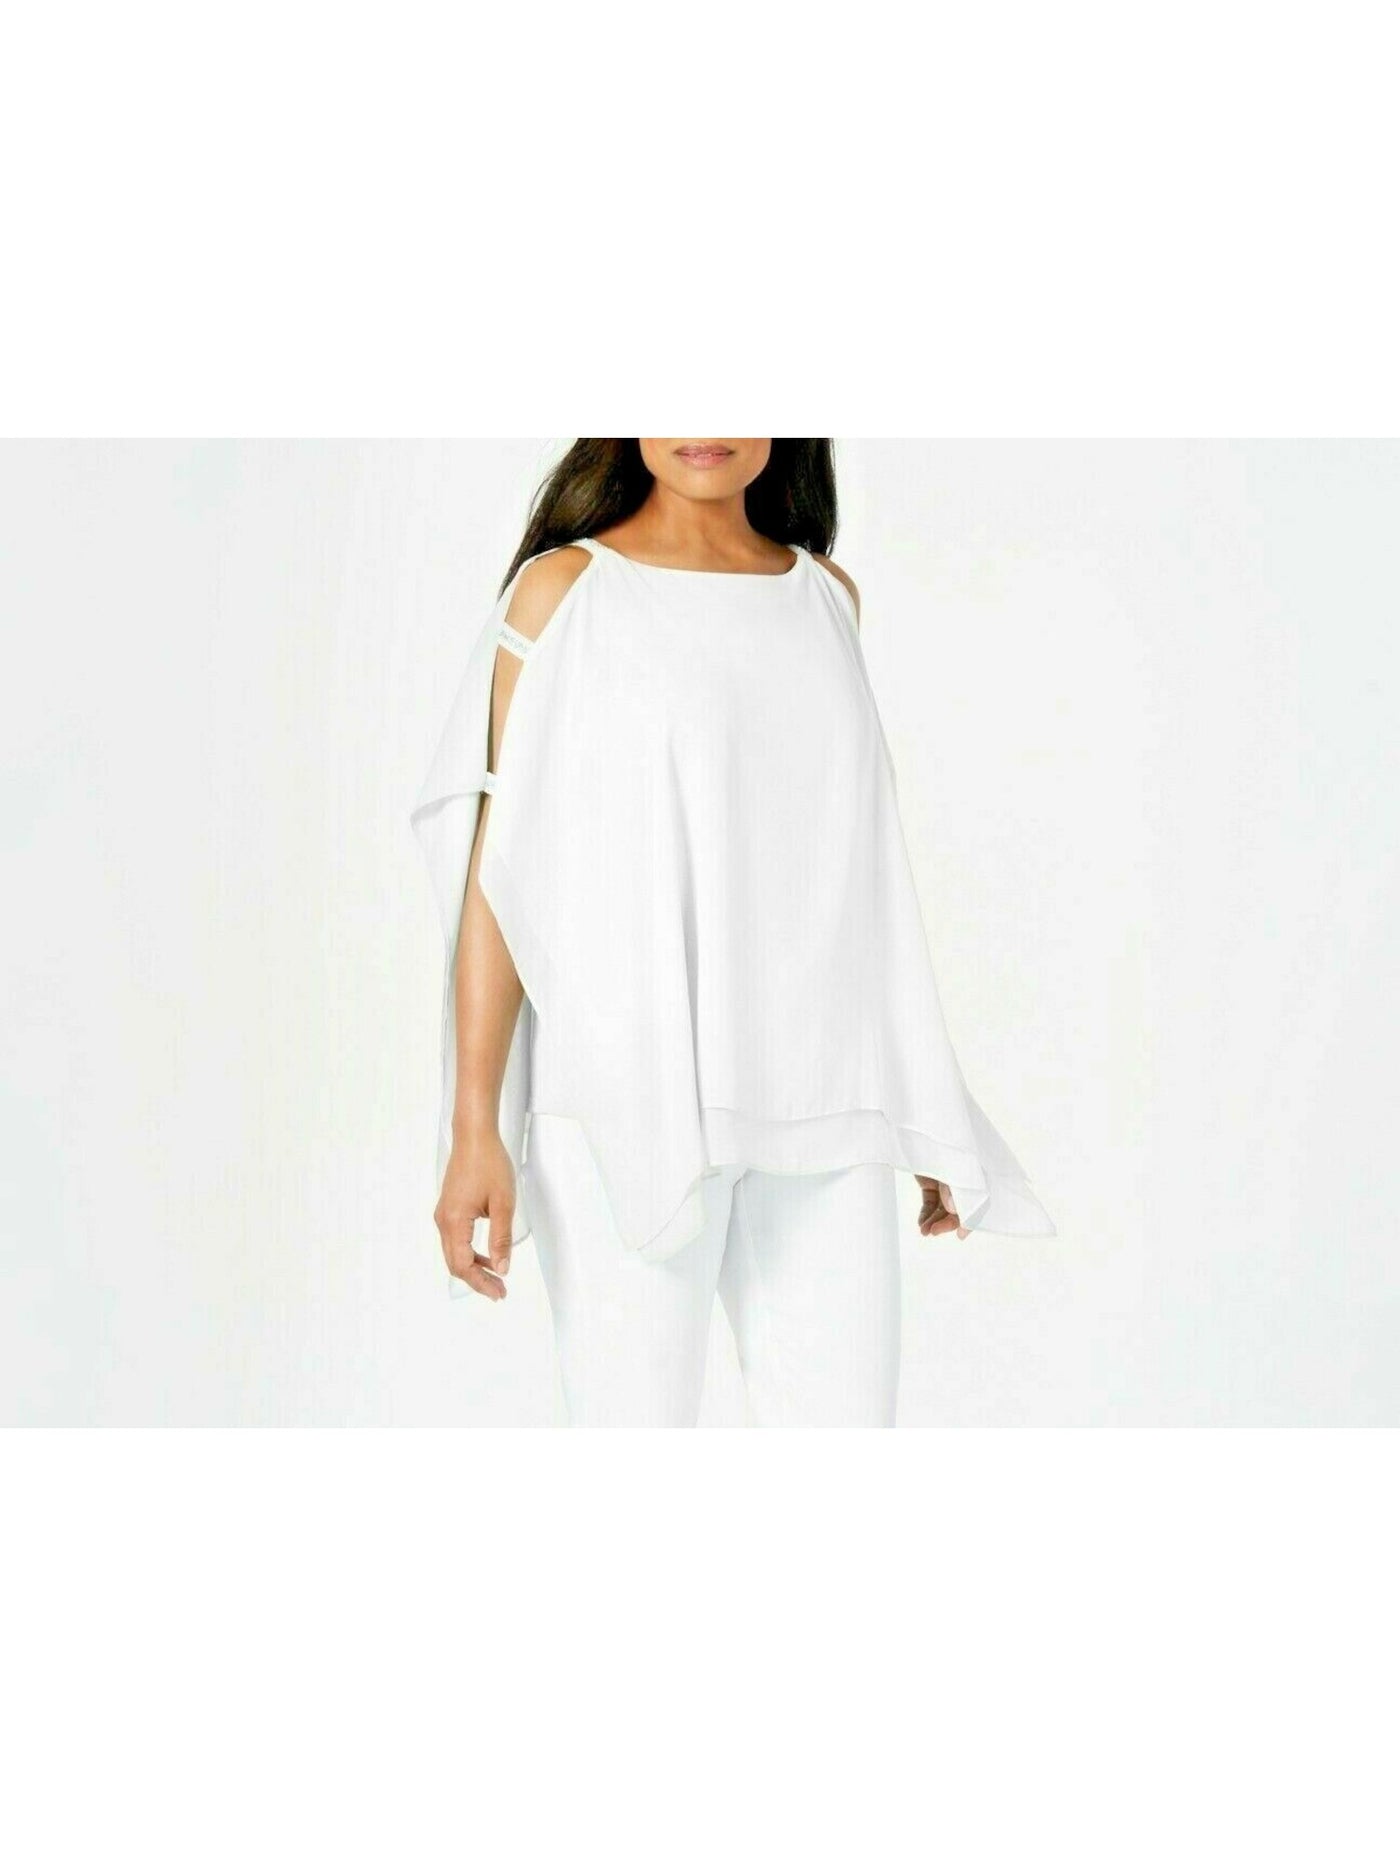 JM COLLECTION Womens White Embellished Cut Out Layered 3/4 Sleeve Boat Neck Cocktail PONCHO Top S